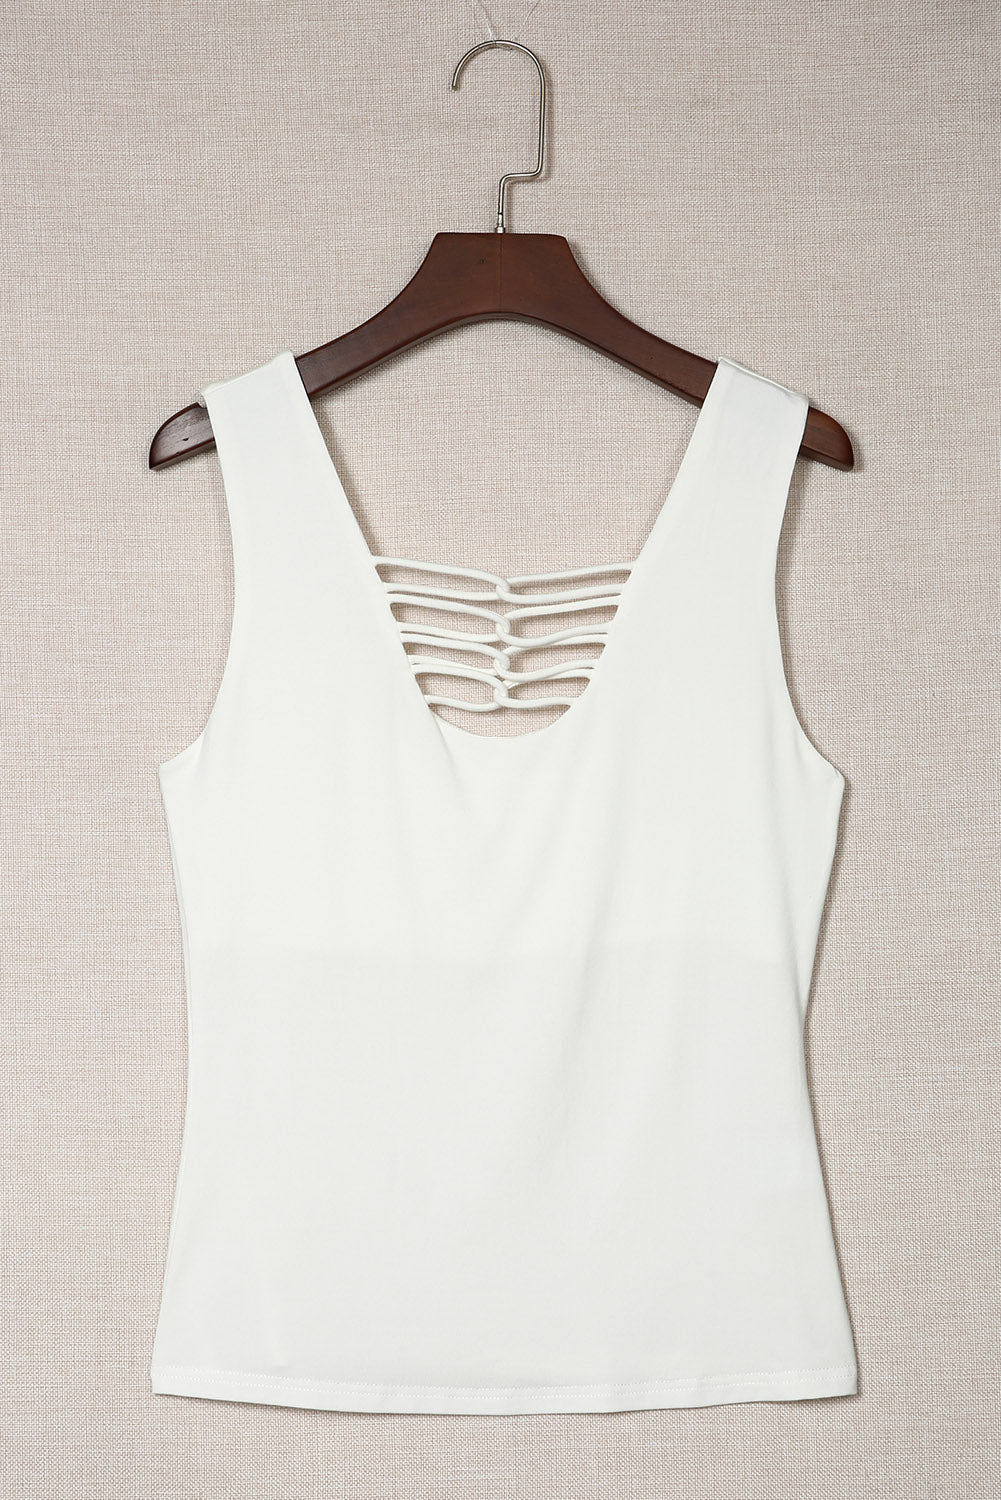 White Lace up Hollow-out Neck Solid Tank Top Tank Tops JT's Designer Fashion